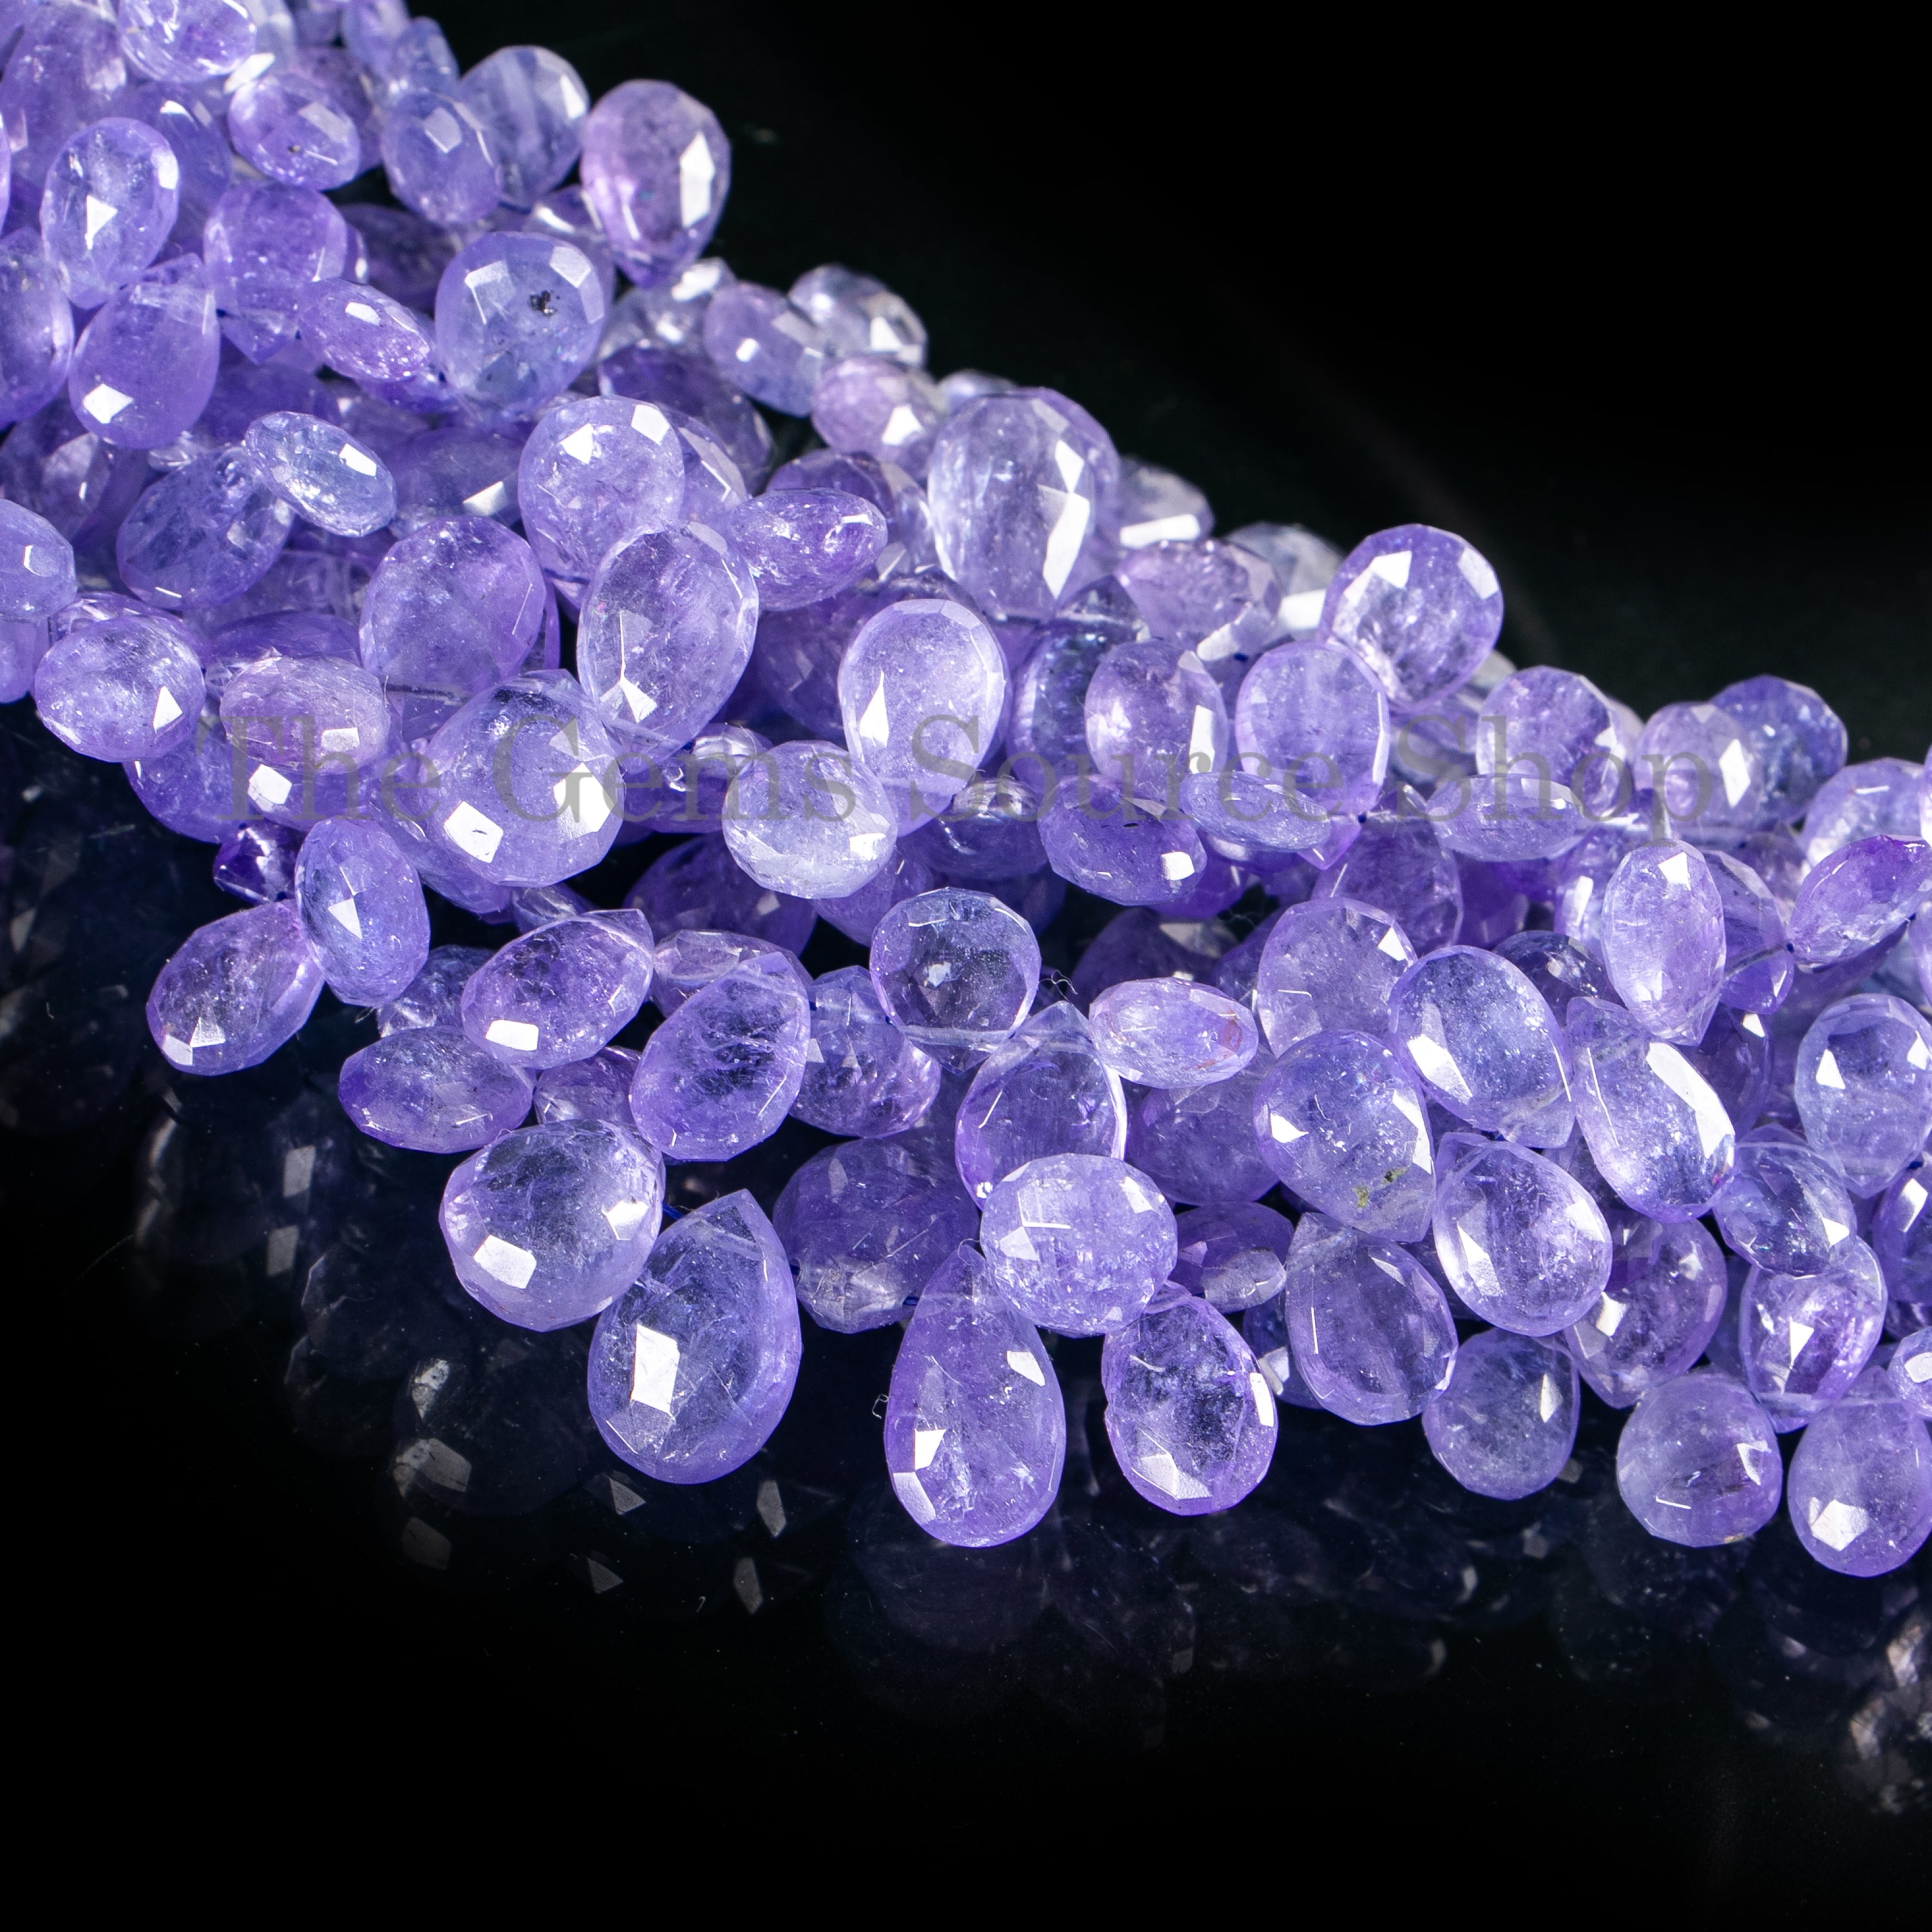 4x6-7x12 mm Tanzanite Faceted Pear Shape Gemstone Beads TGS-4700